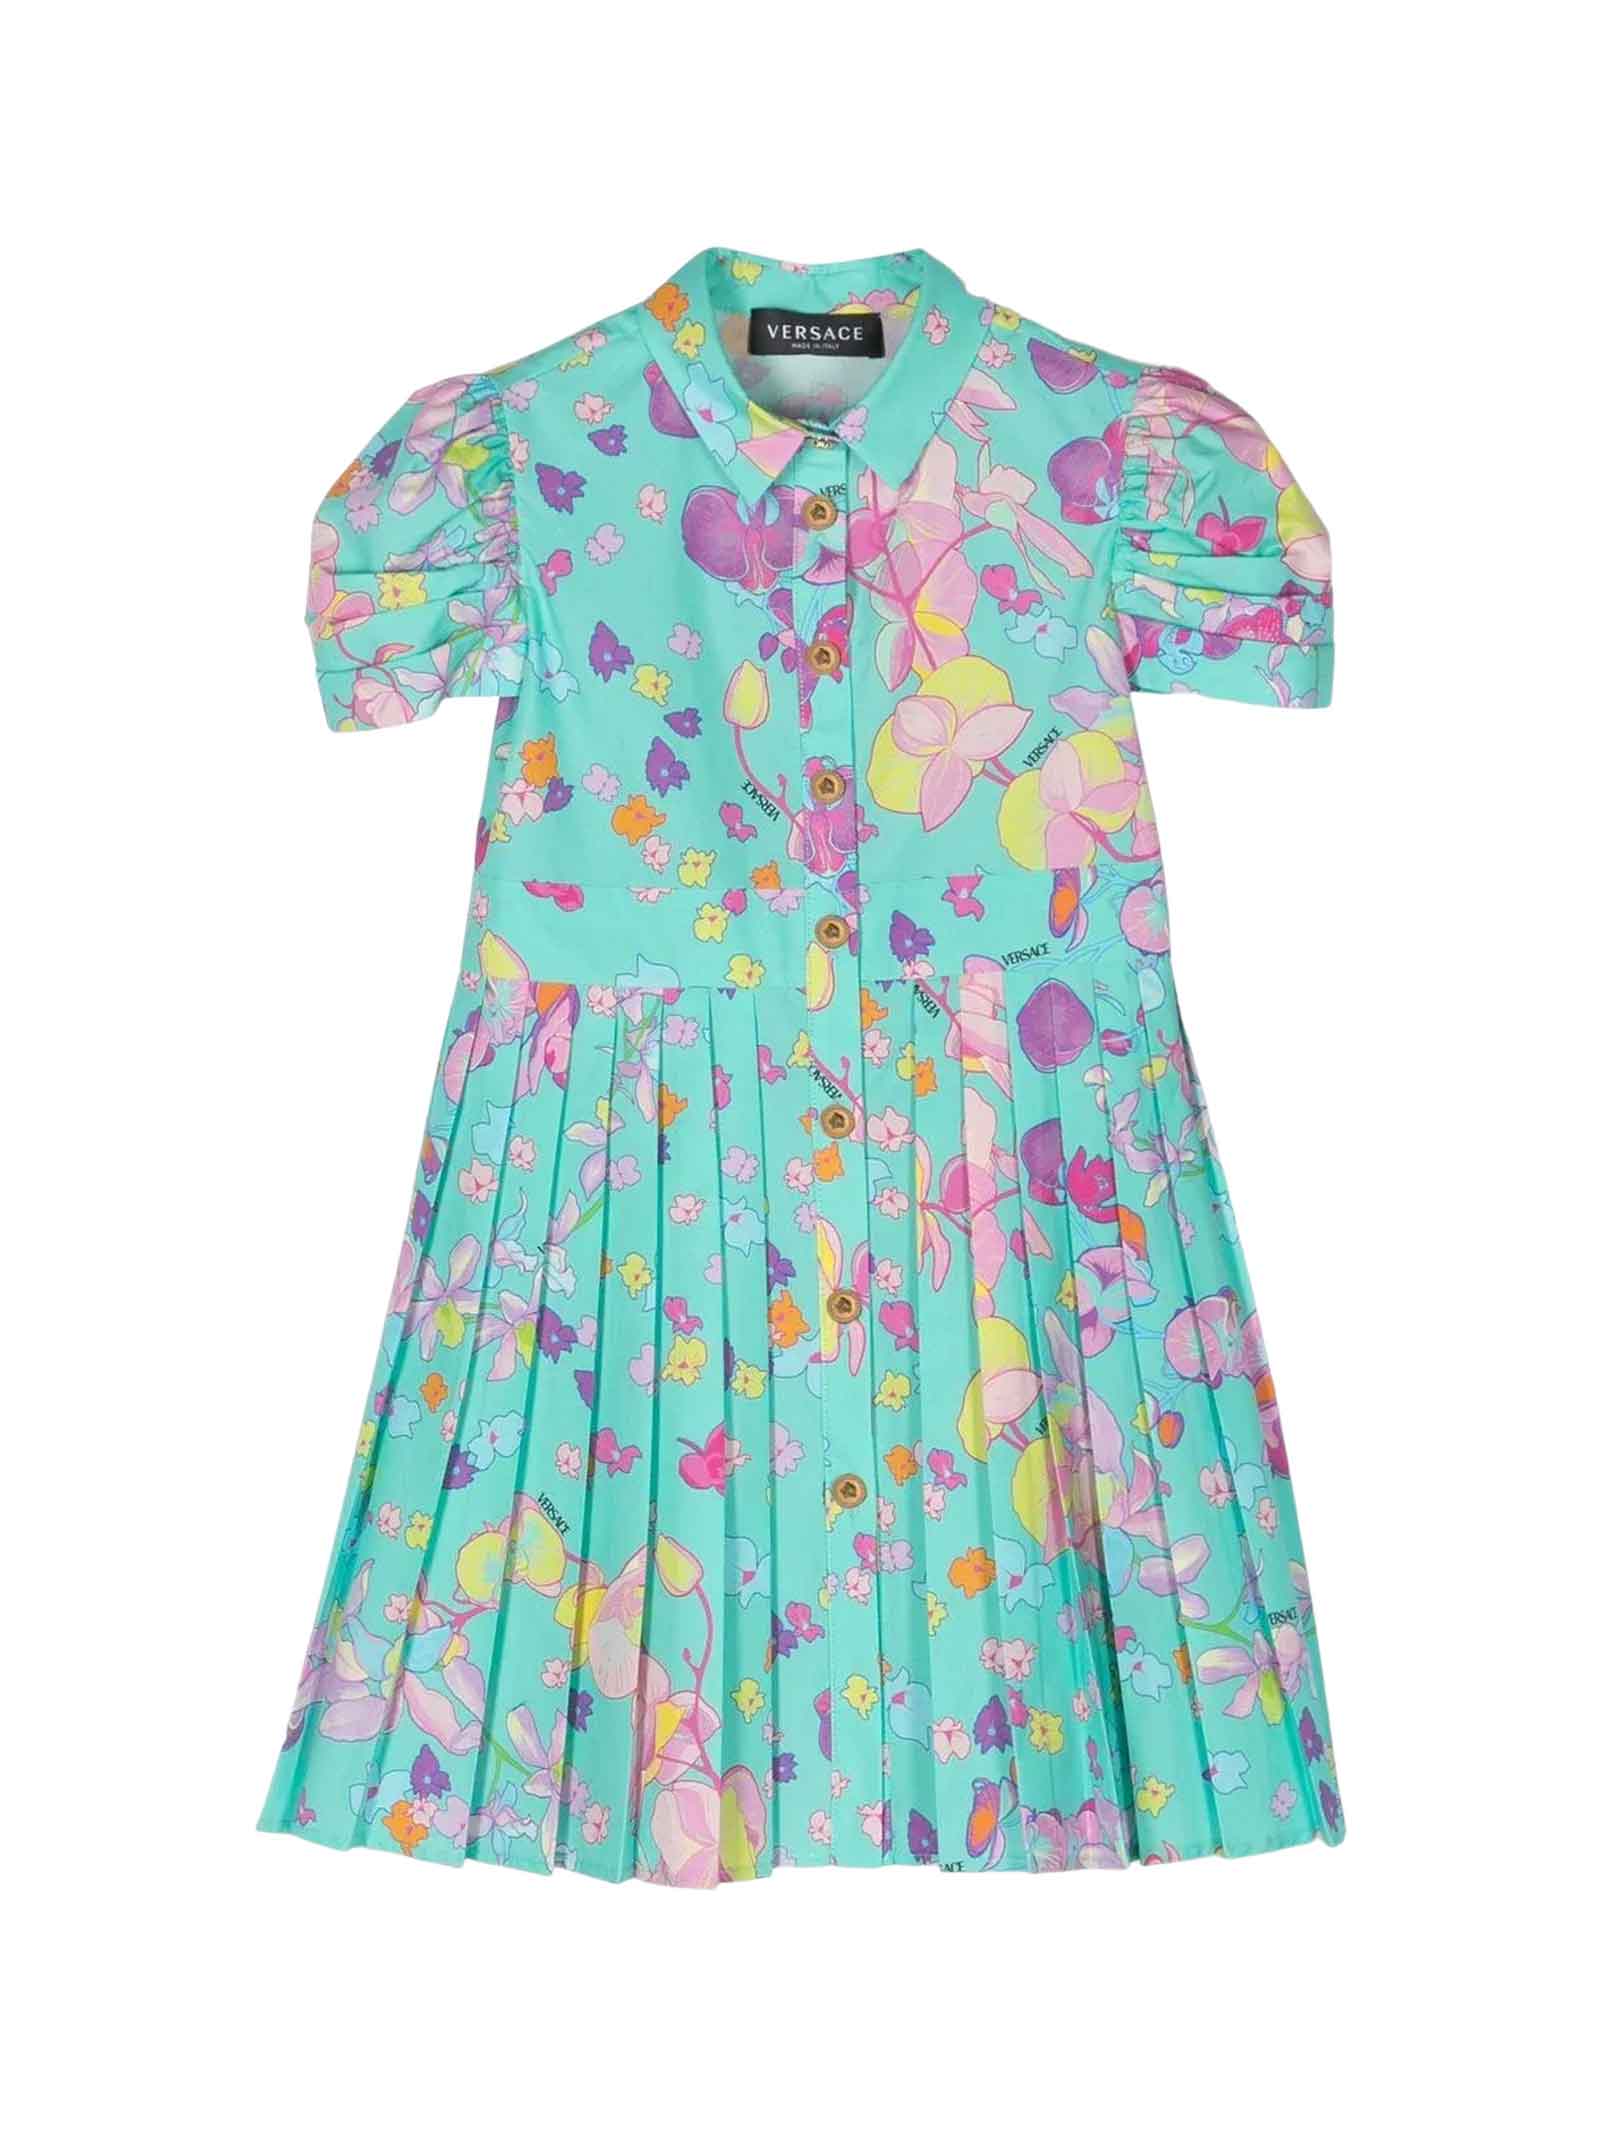 YOUNG VERSACE MULTICOLOR DRESS GIRL KIDS